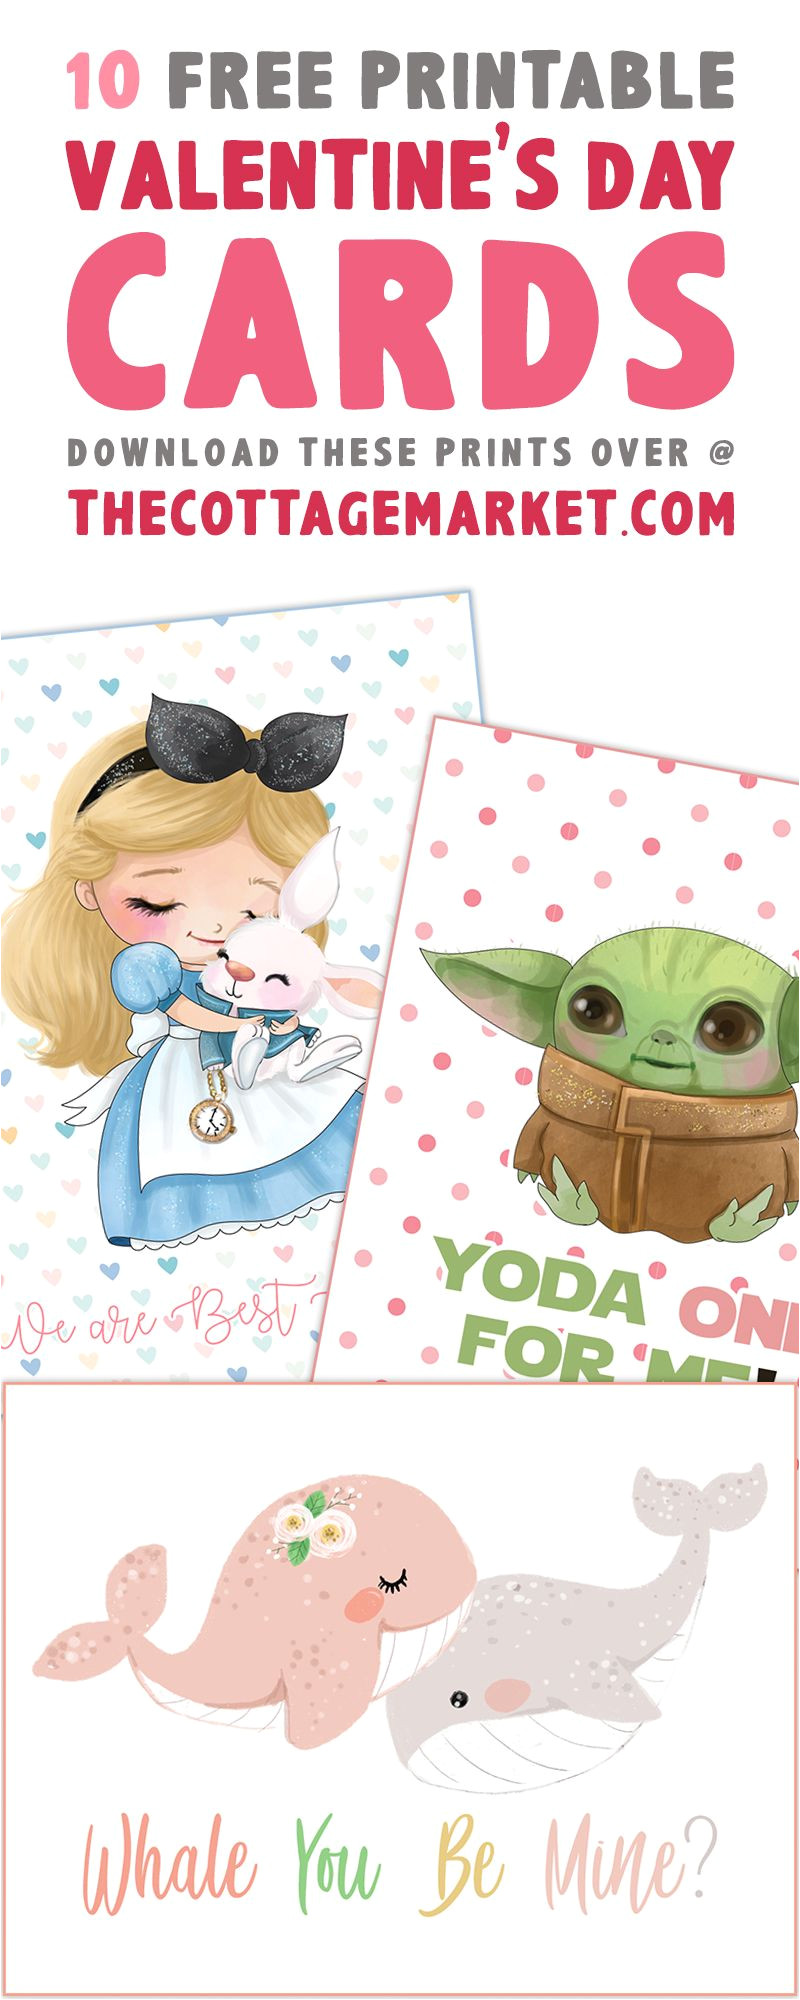 Yoda Best Valentine S Card Printable Wonderful Free Printable Valentines Day Cards In 2020 with